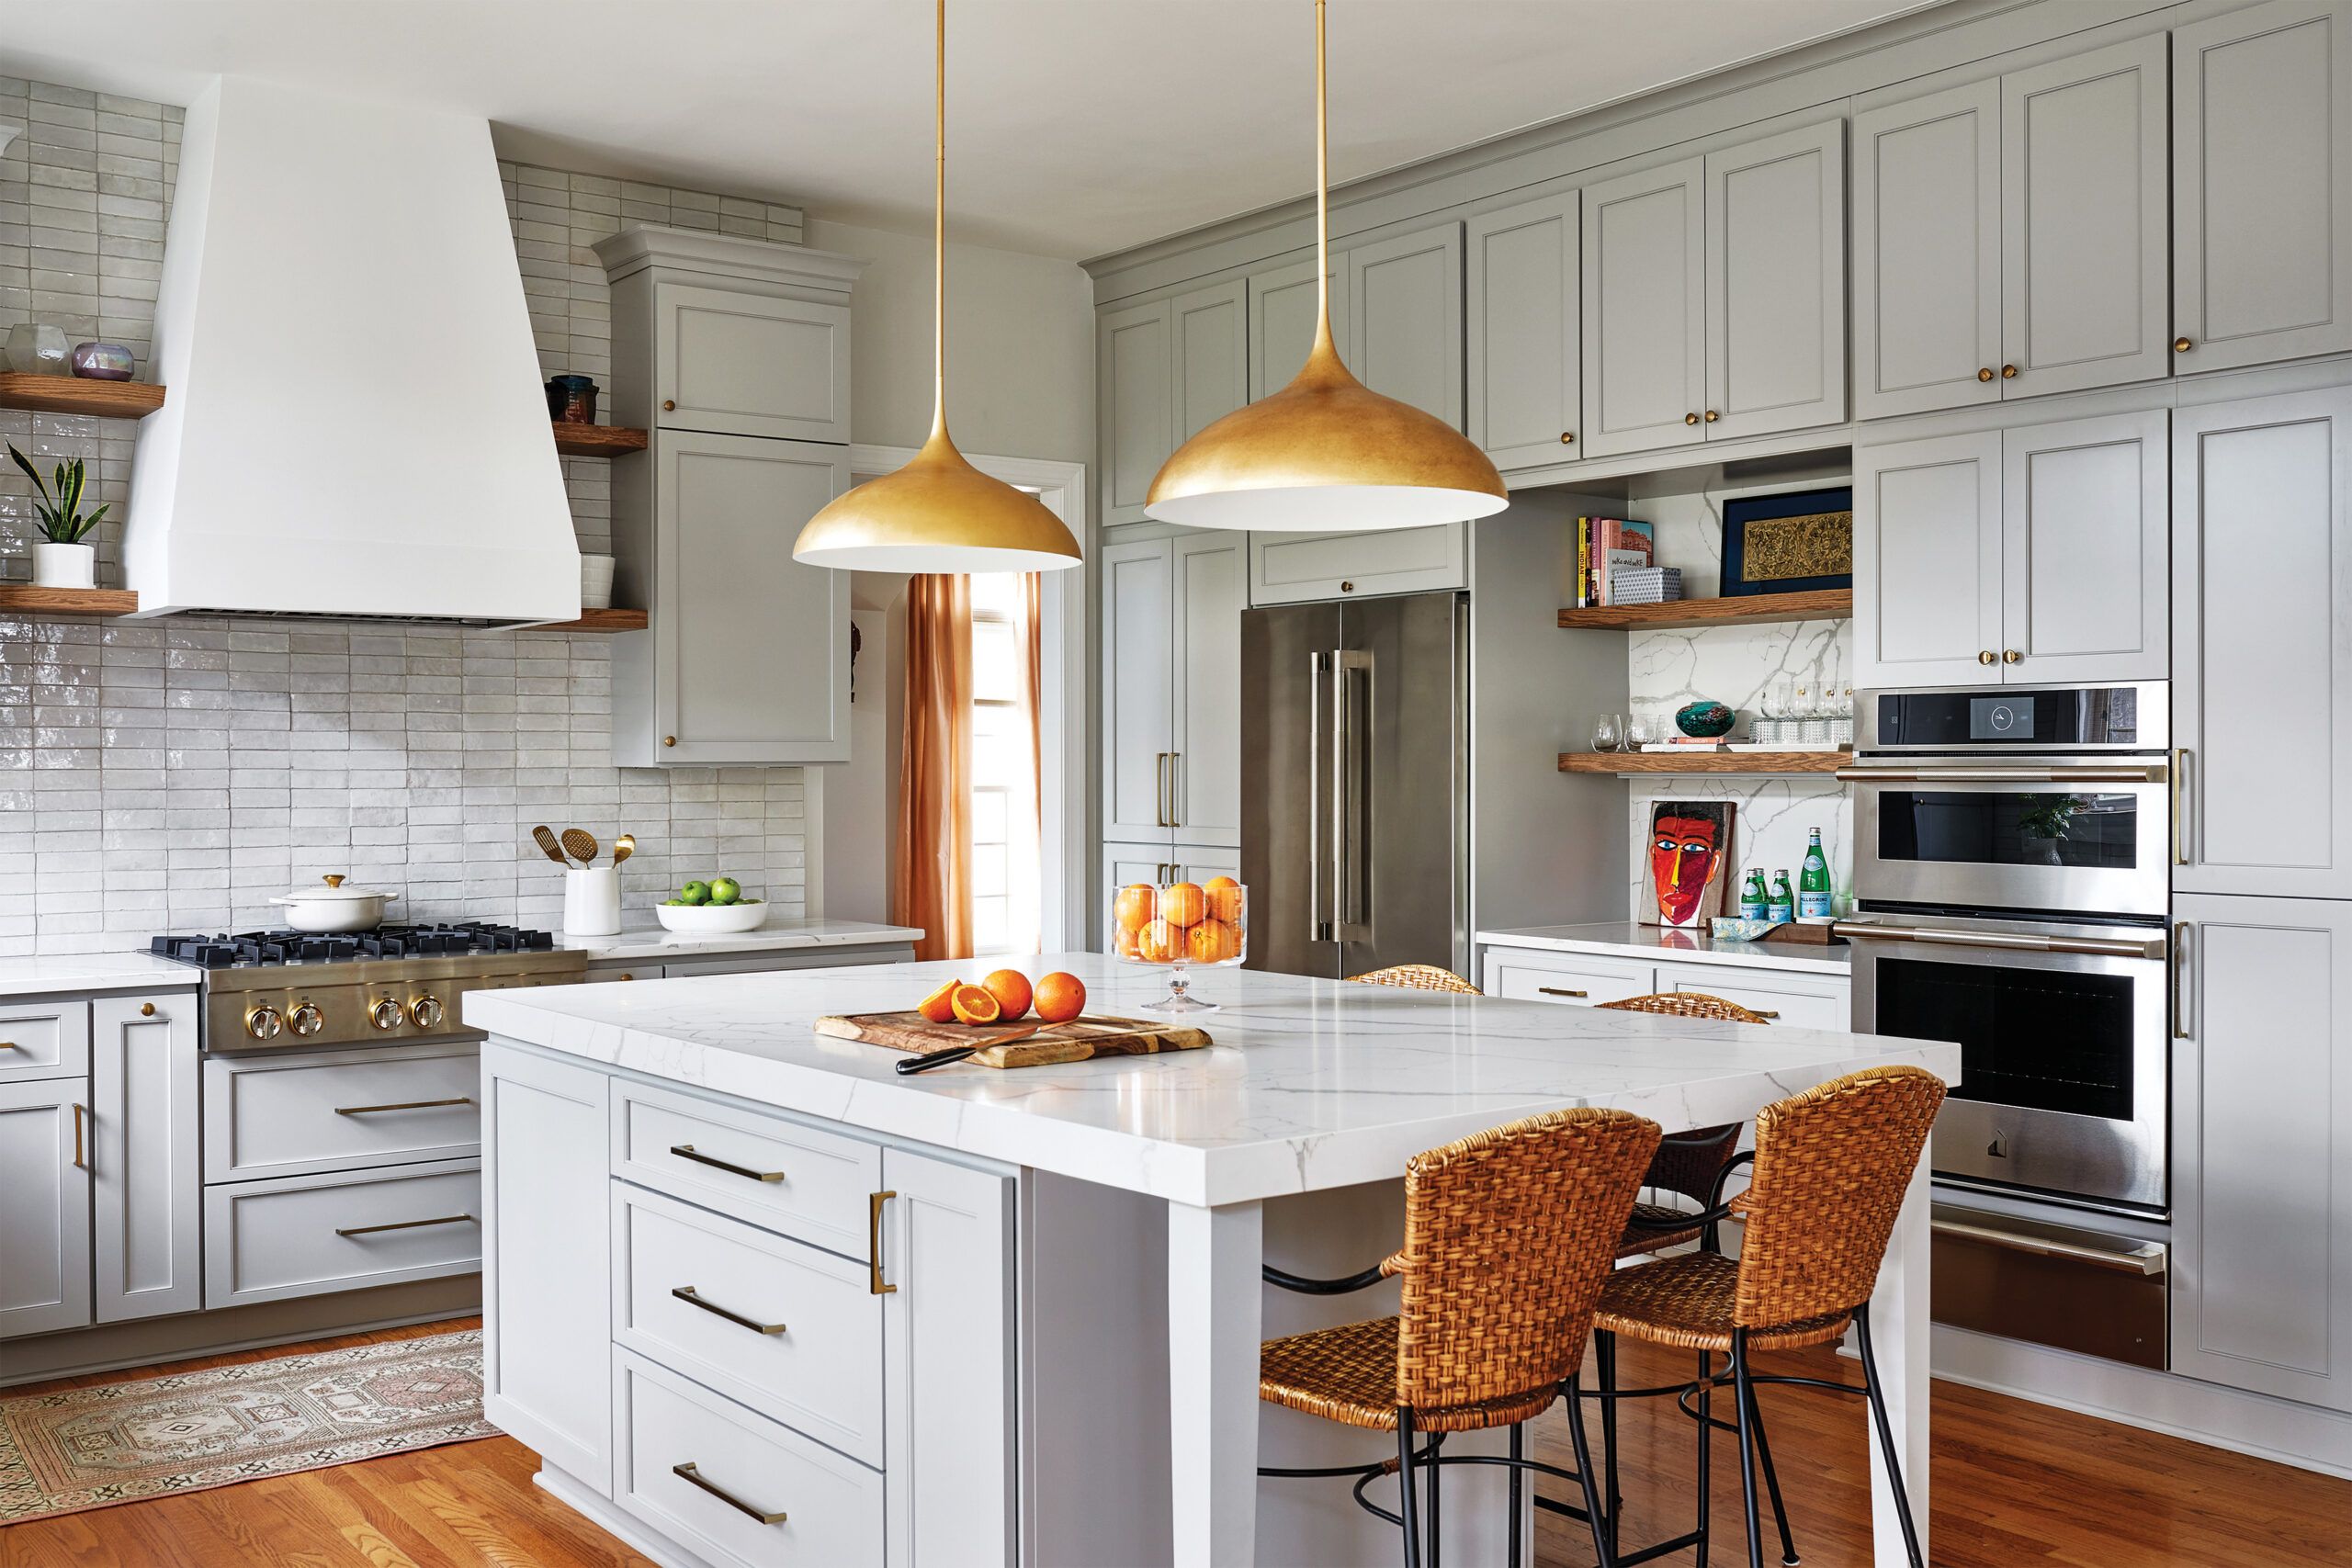 Before and After: Kitchen Island Design Ideas - This Old House